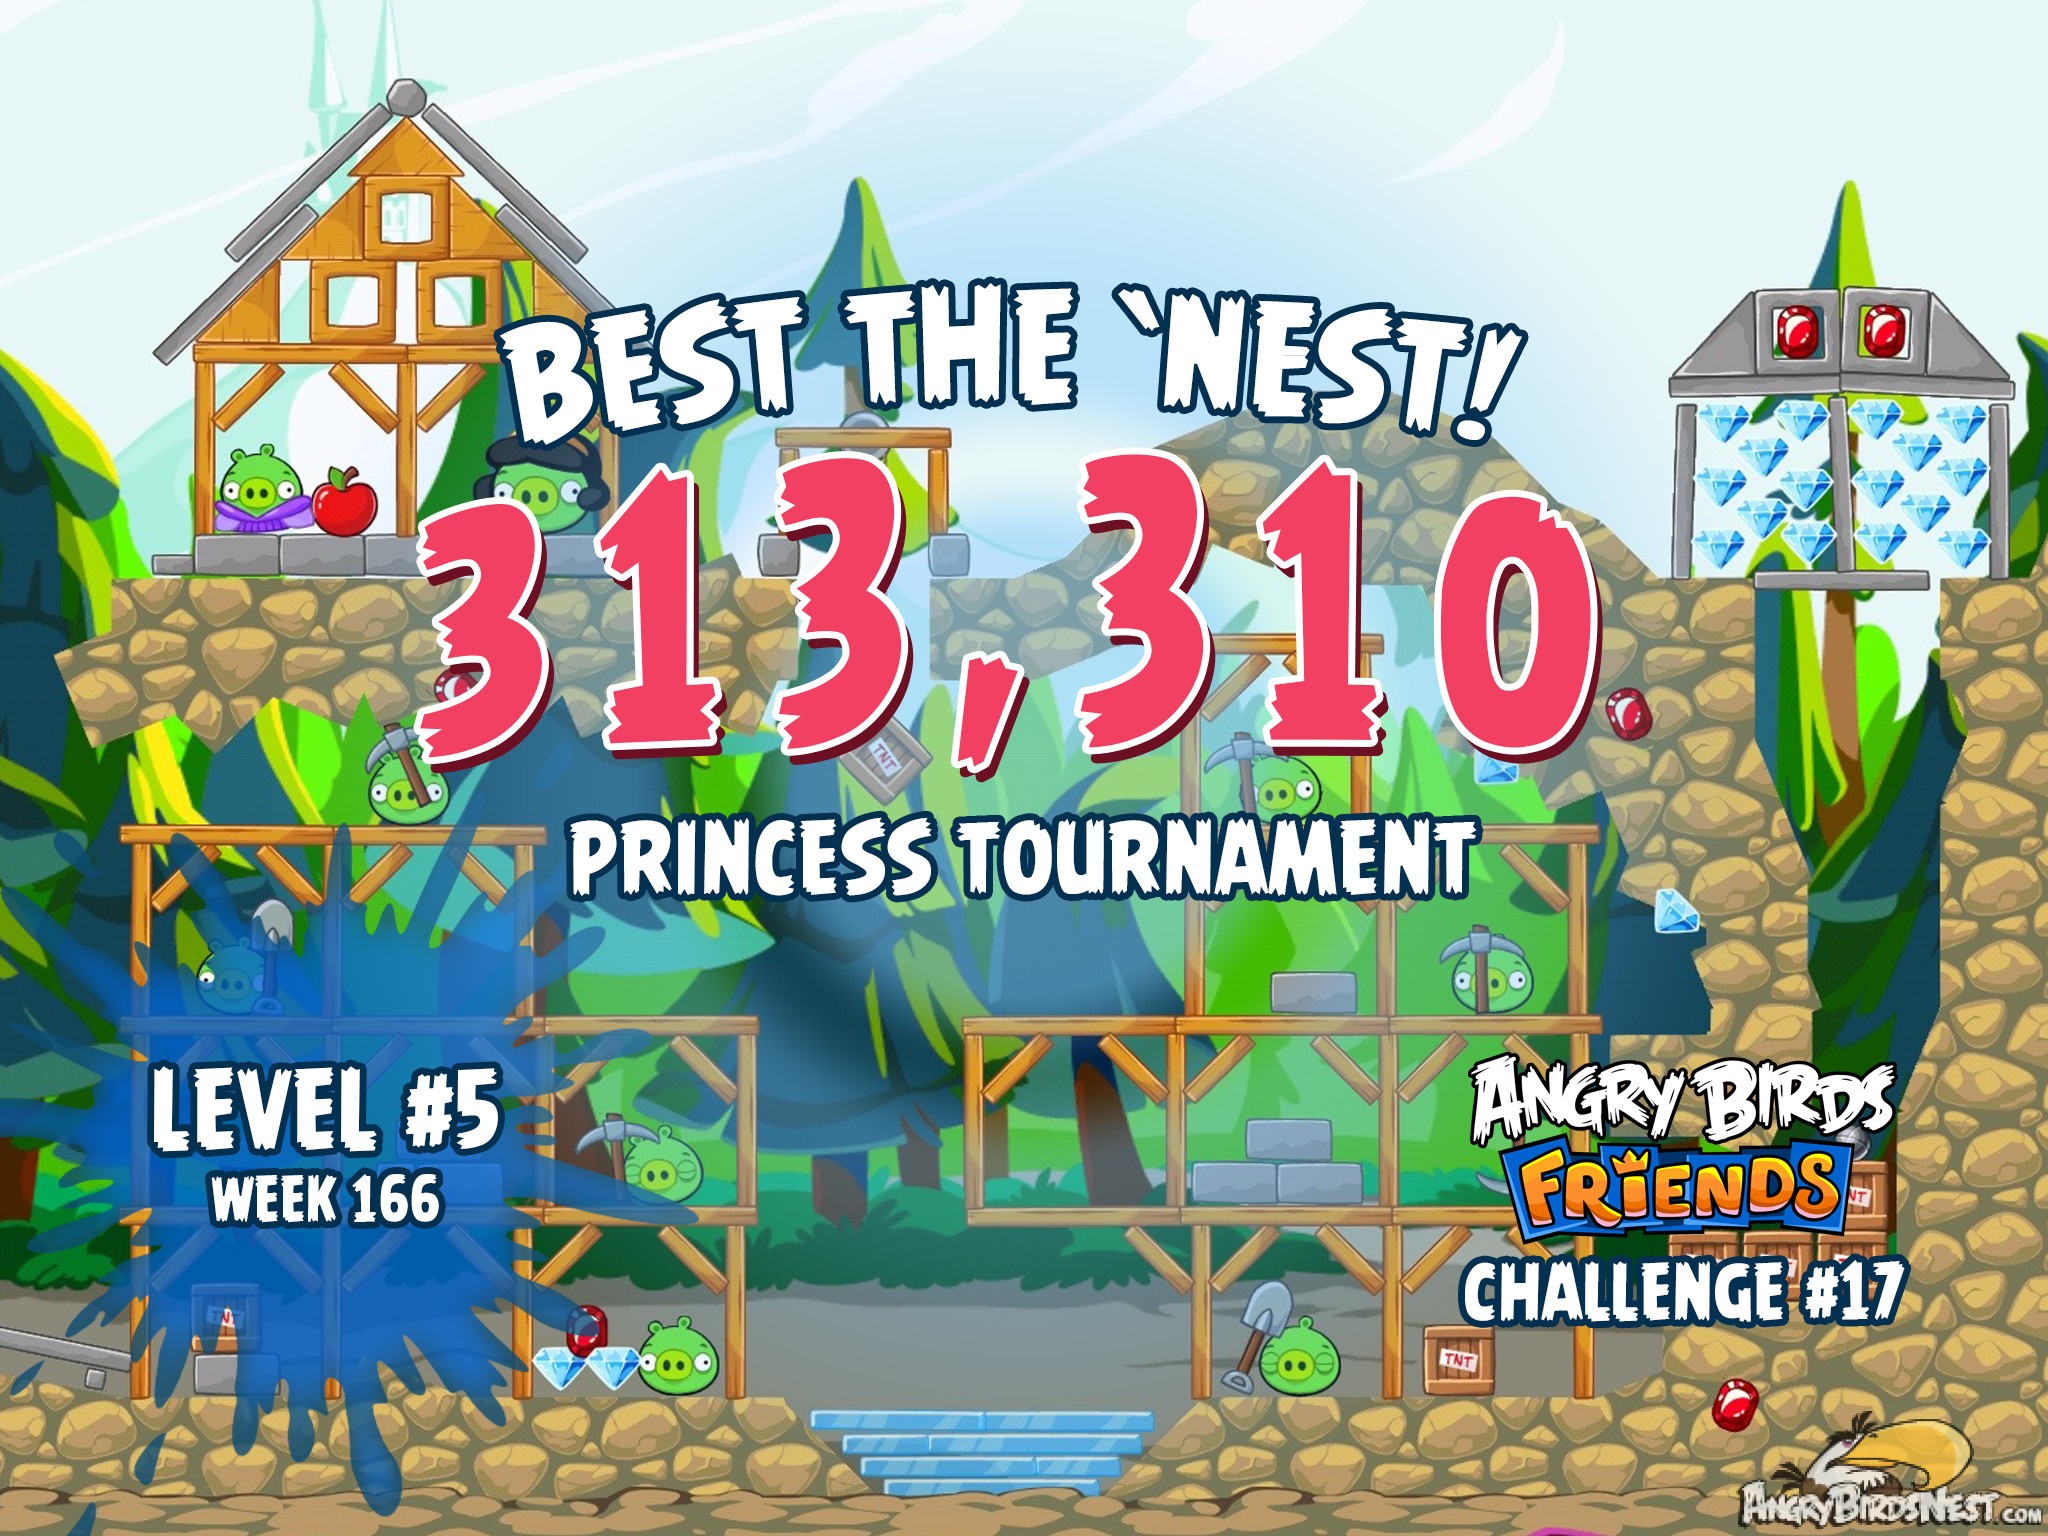 Angry Birds Friends Best the Nest Challenge Week 17